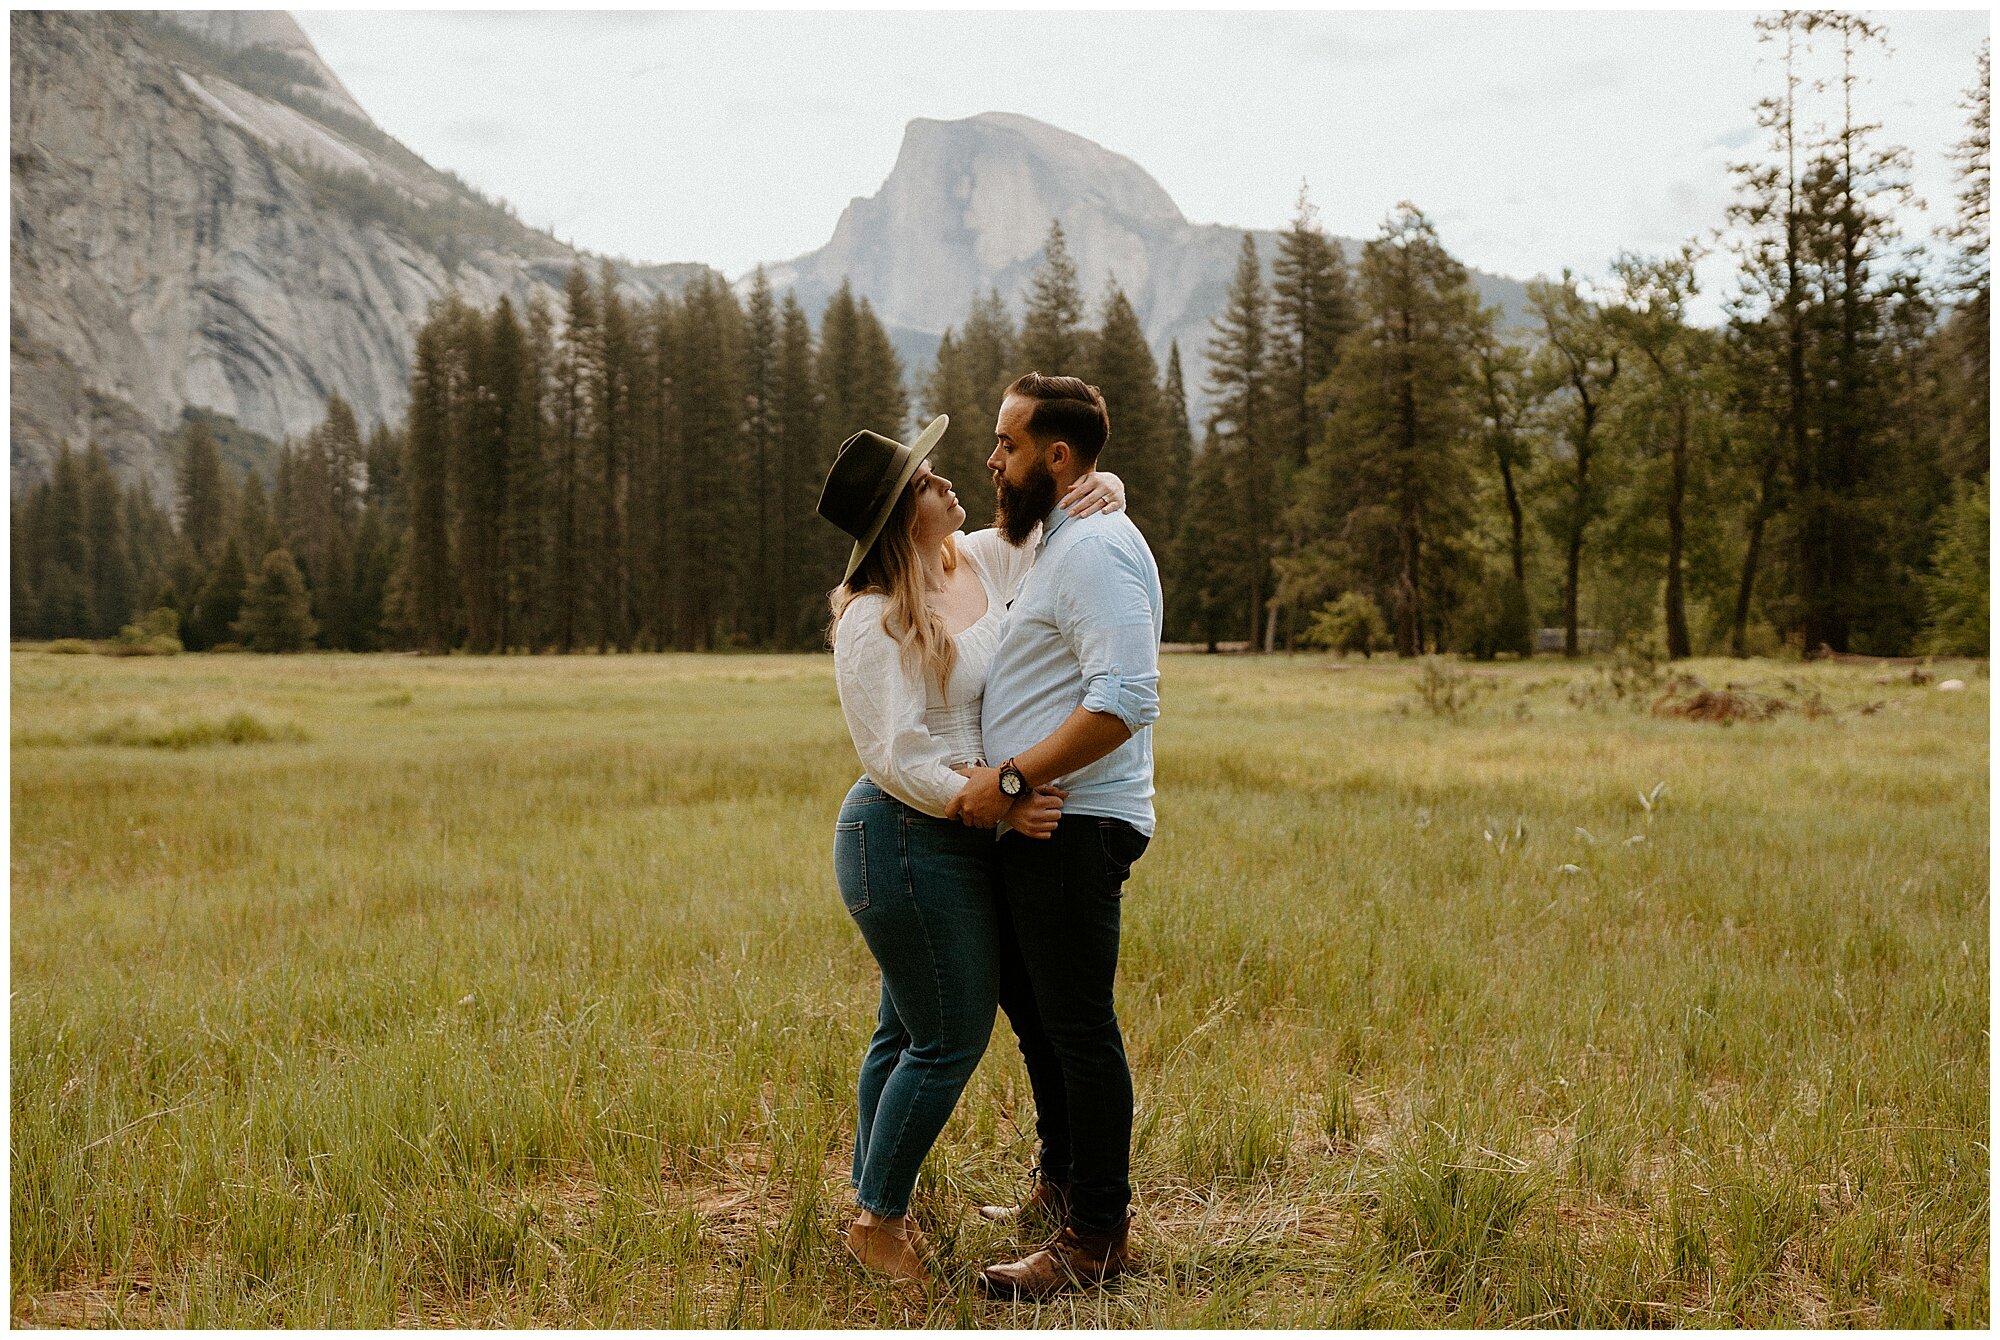 Jaqueline and Ronnie's Yosemite Engagement Session_0038.jpg